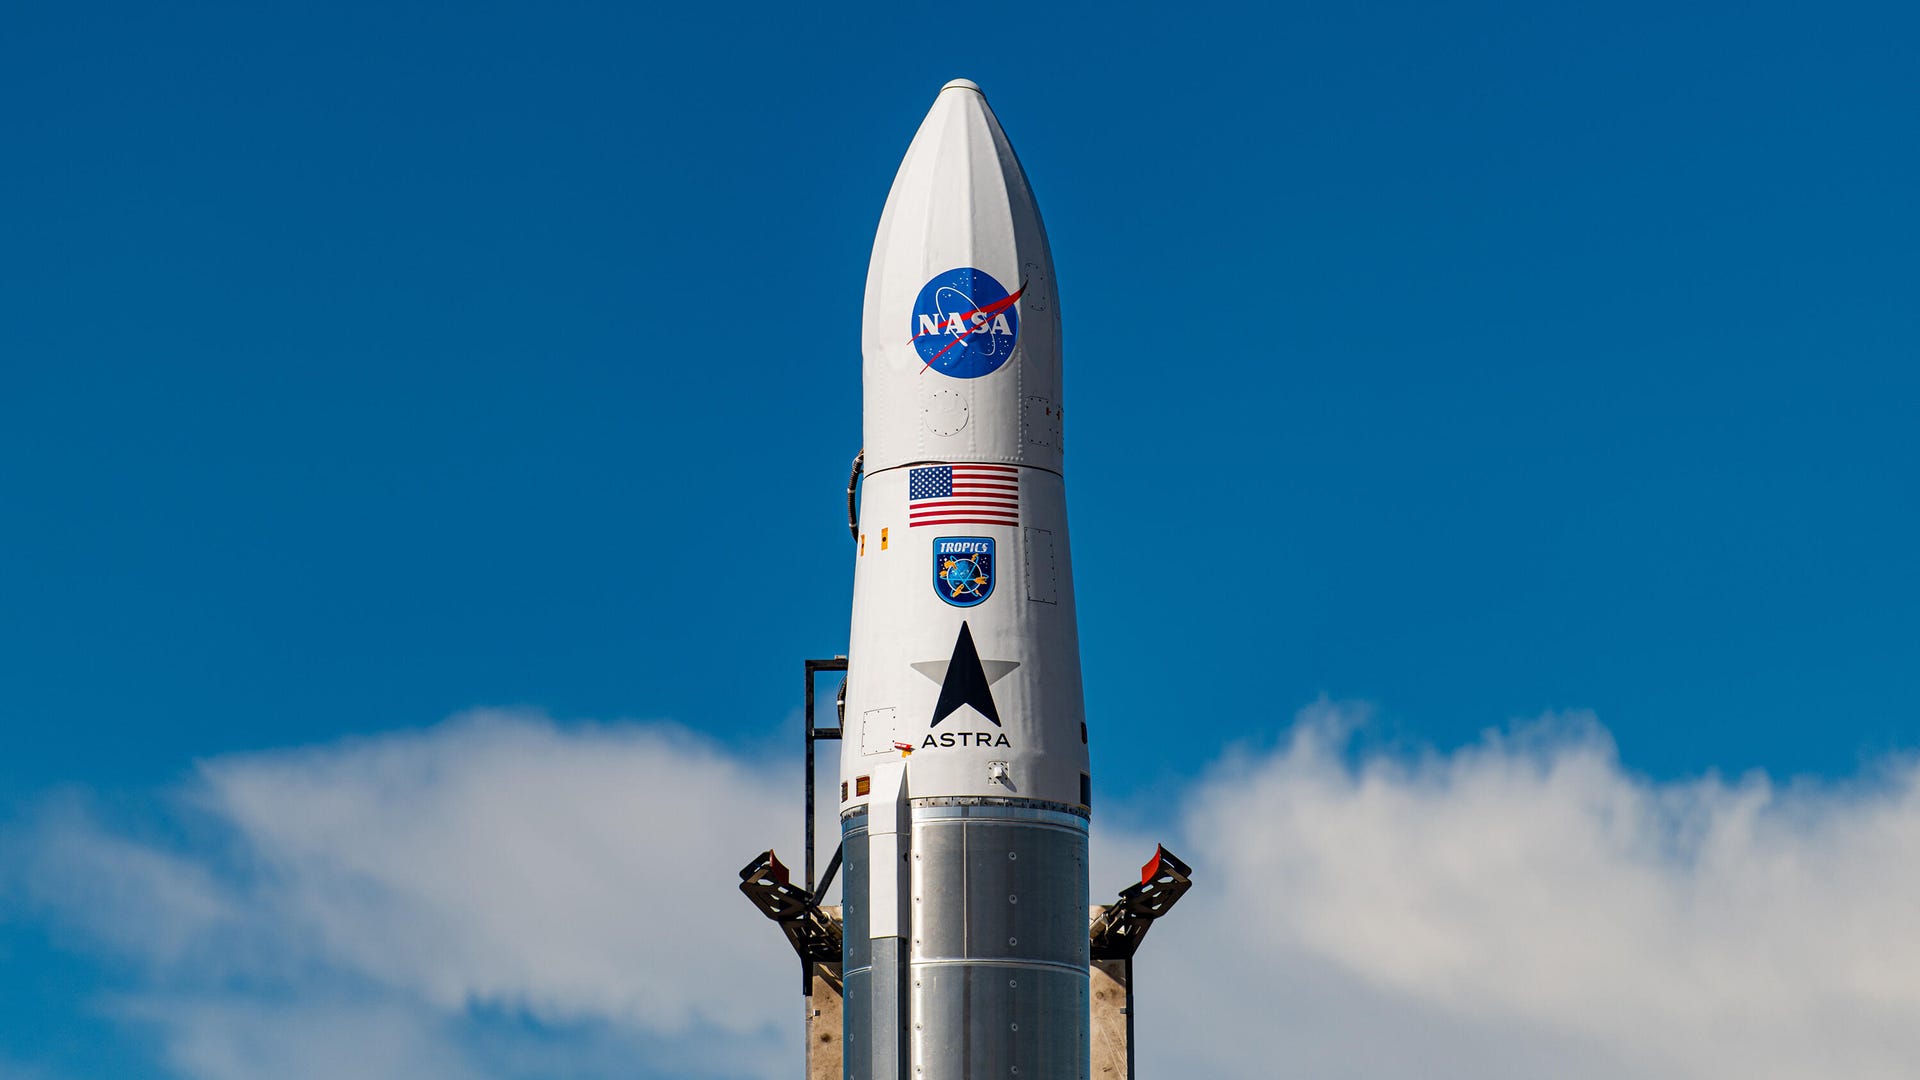 Astra's rocket stands against the sky prior to the Tropics-1 launch.